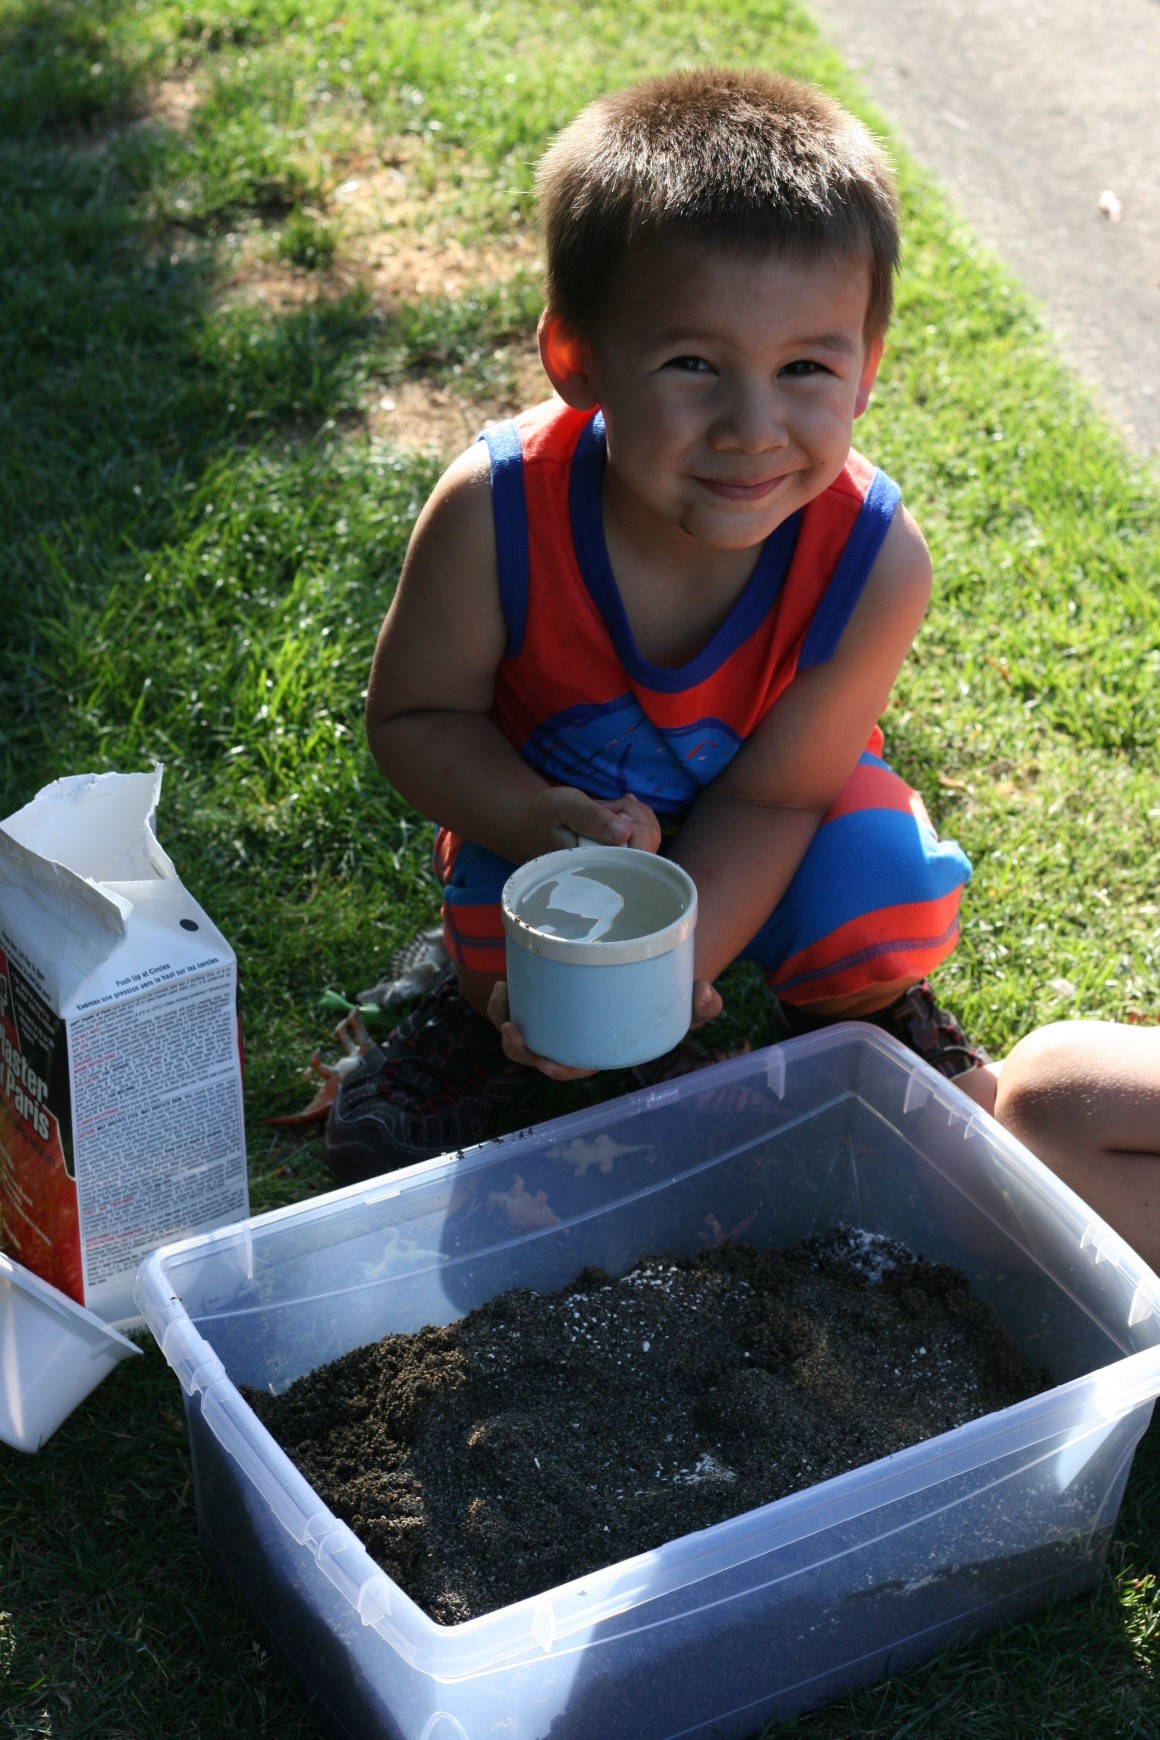 Make your own dinosaur excavation sensory bin. Perfect for palaeontologists to be